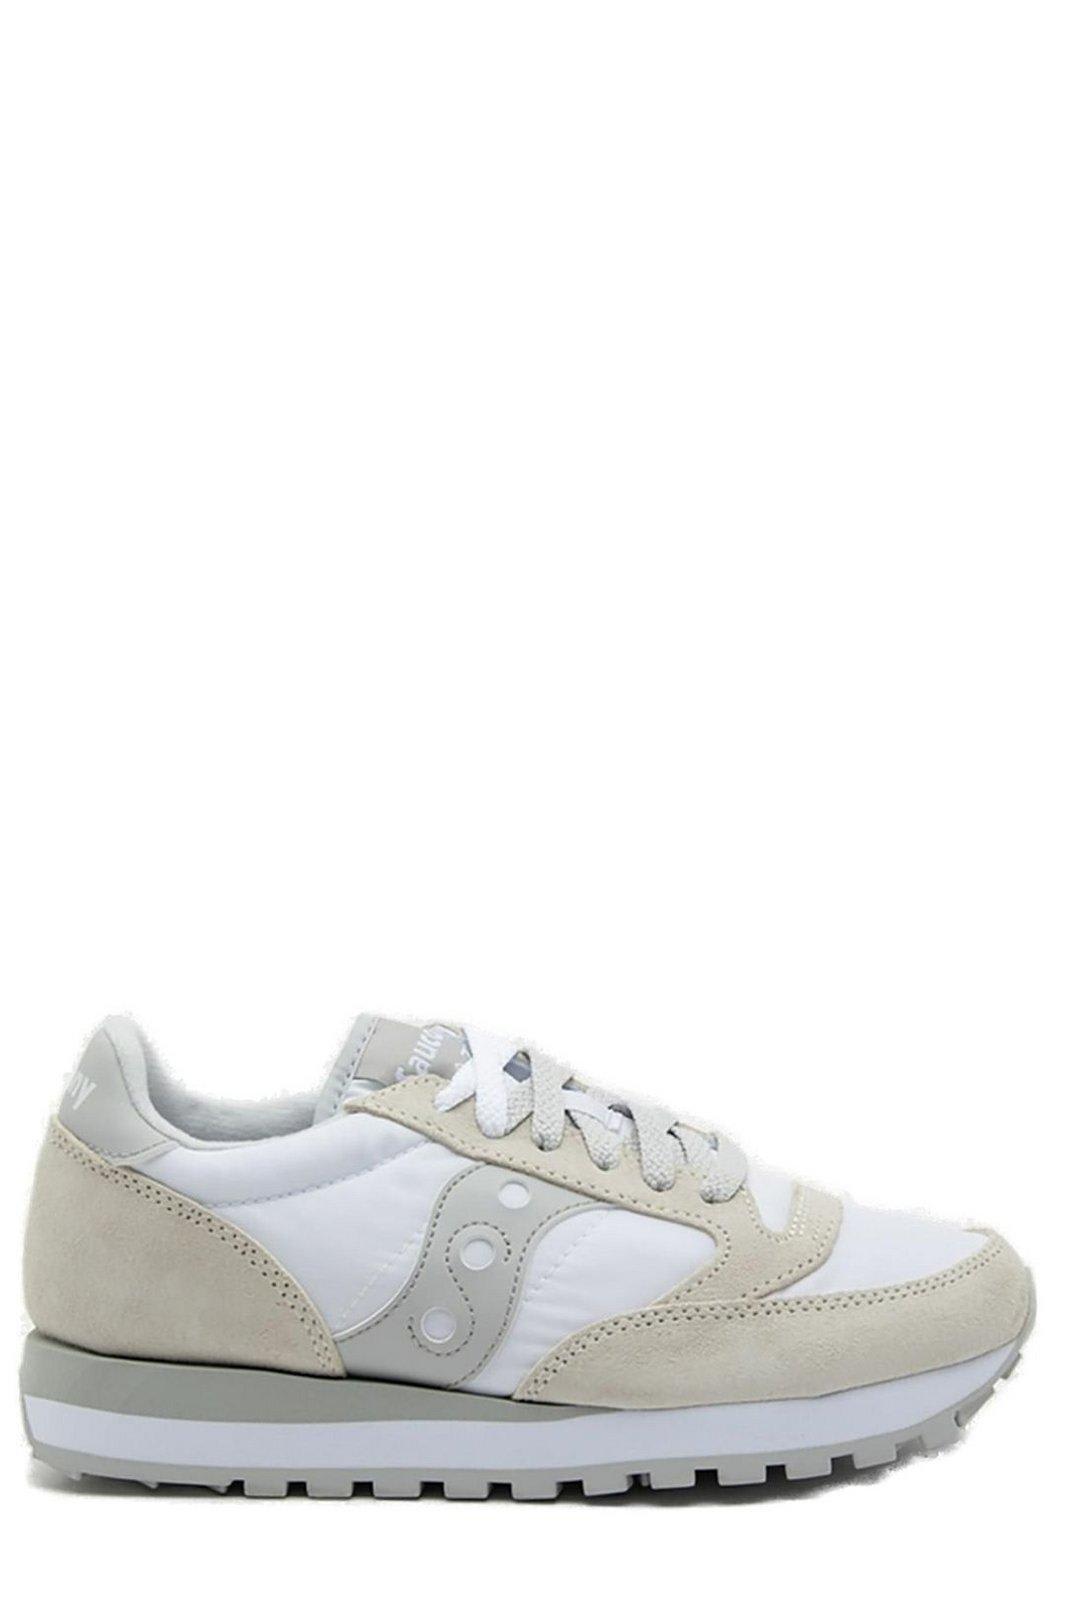 Shop Saucony Jazz Original Lace-up Sneakers Sneakers In White